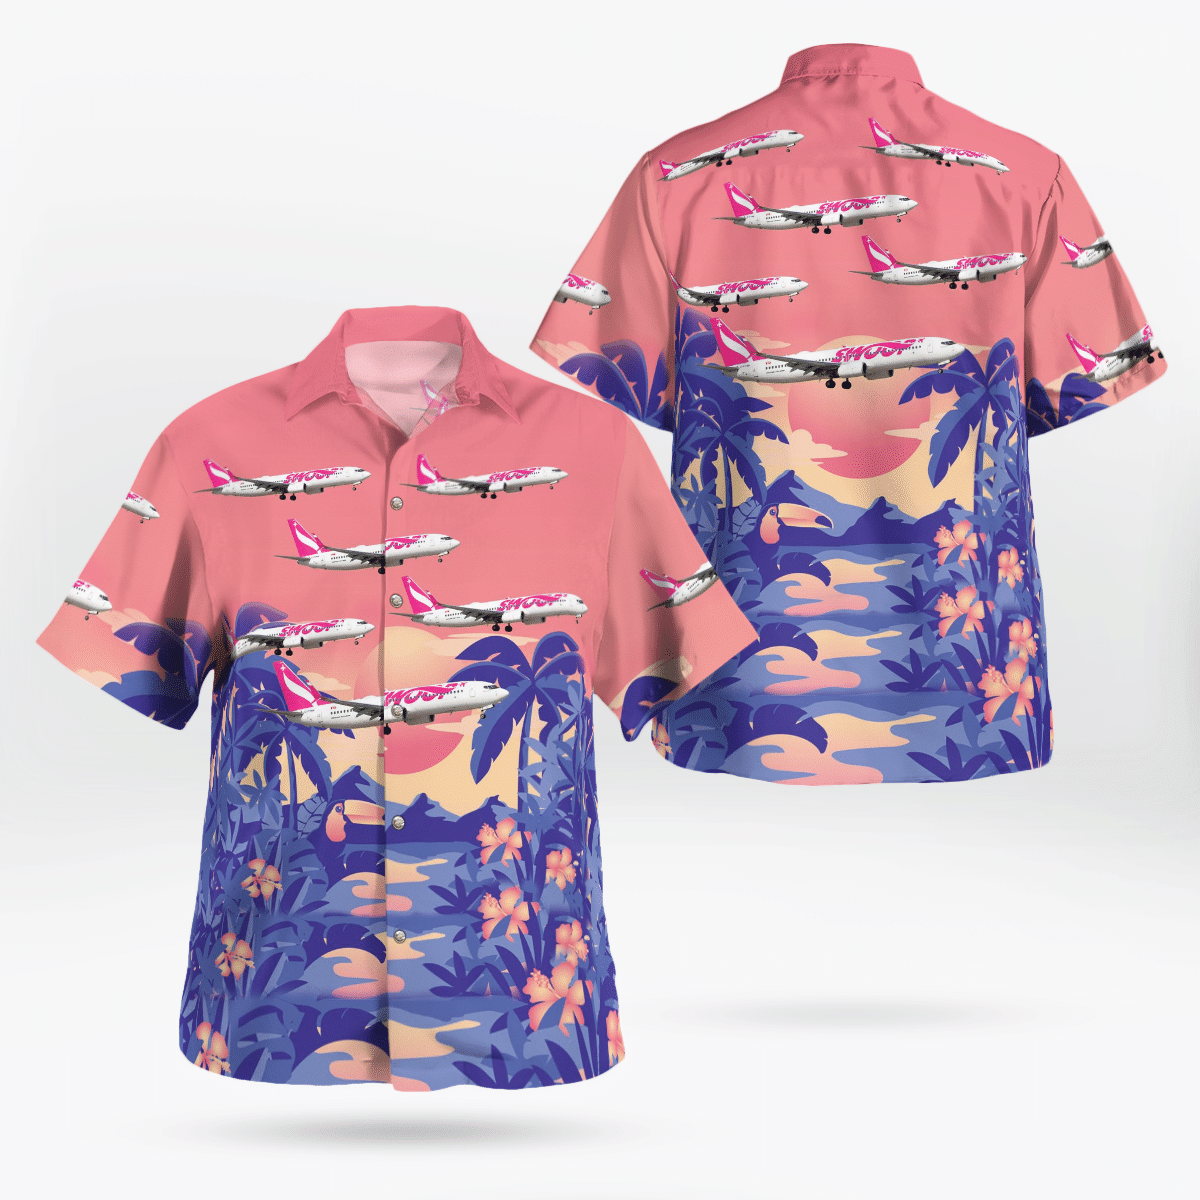 BEST Swoop airline Boeing 737-8CT 3D Aloha Shirt1